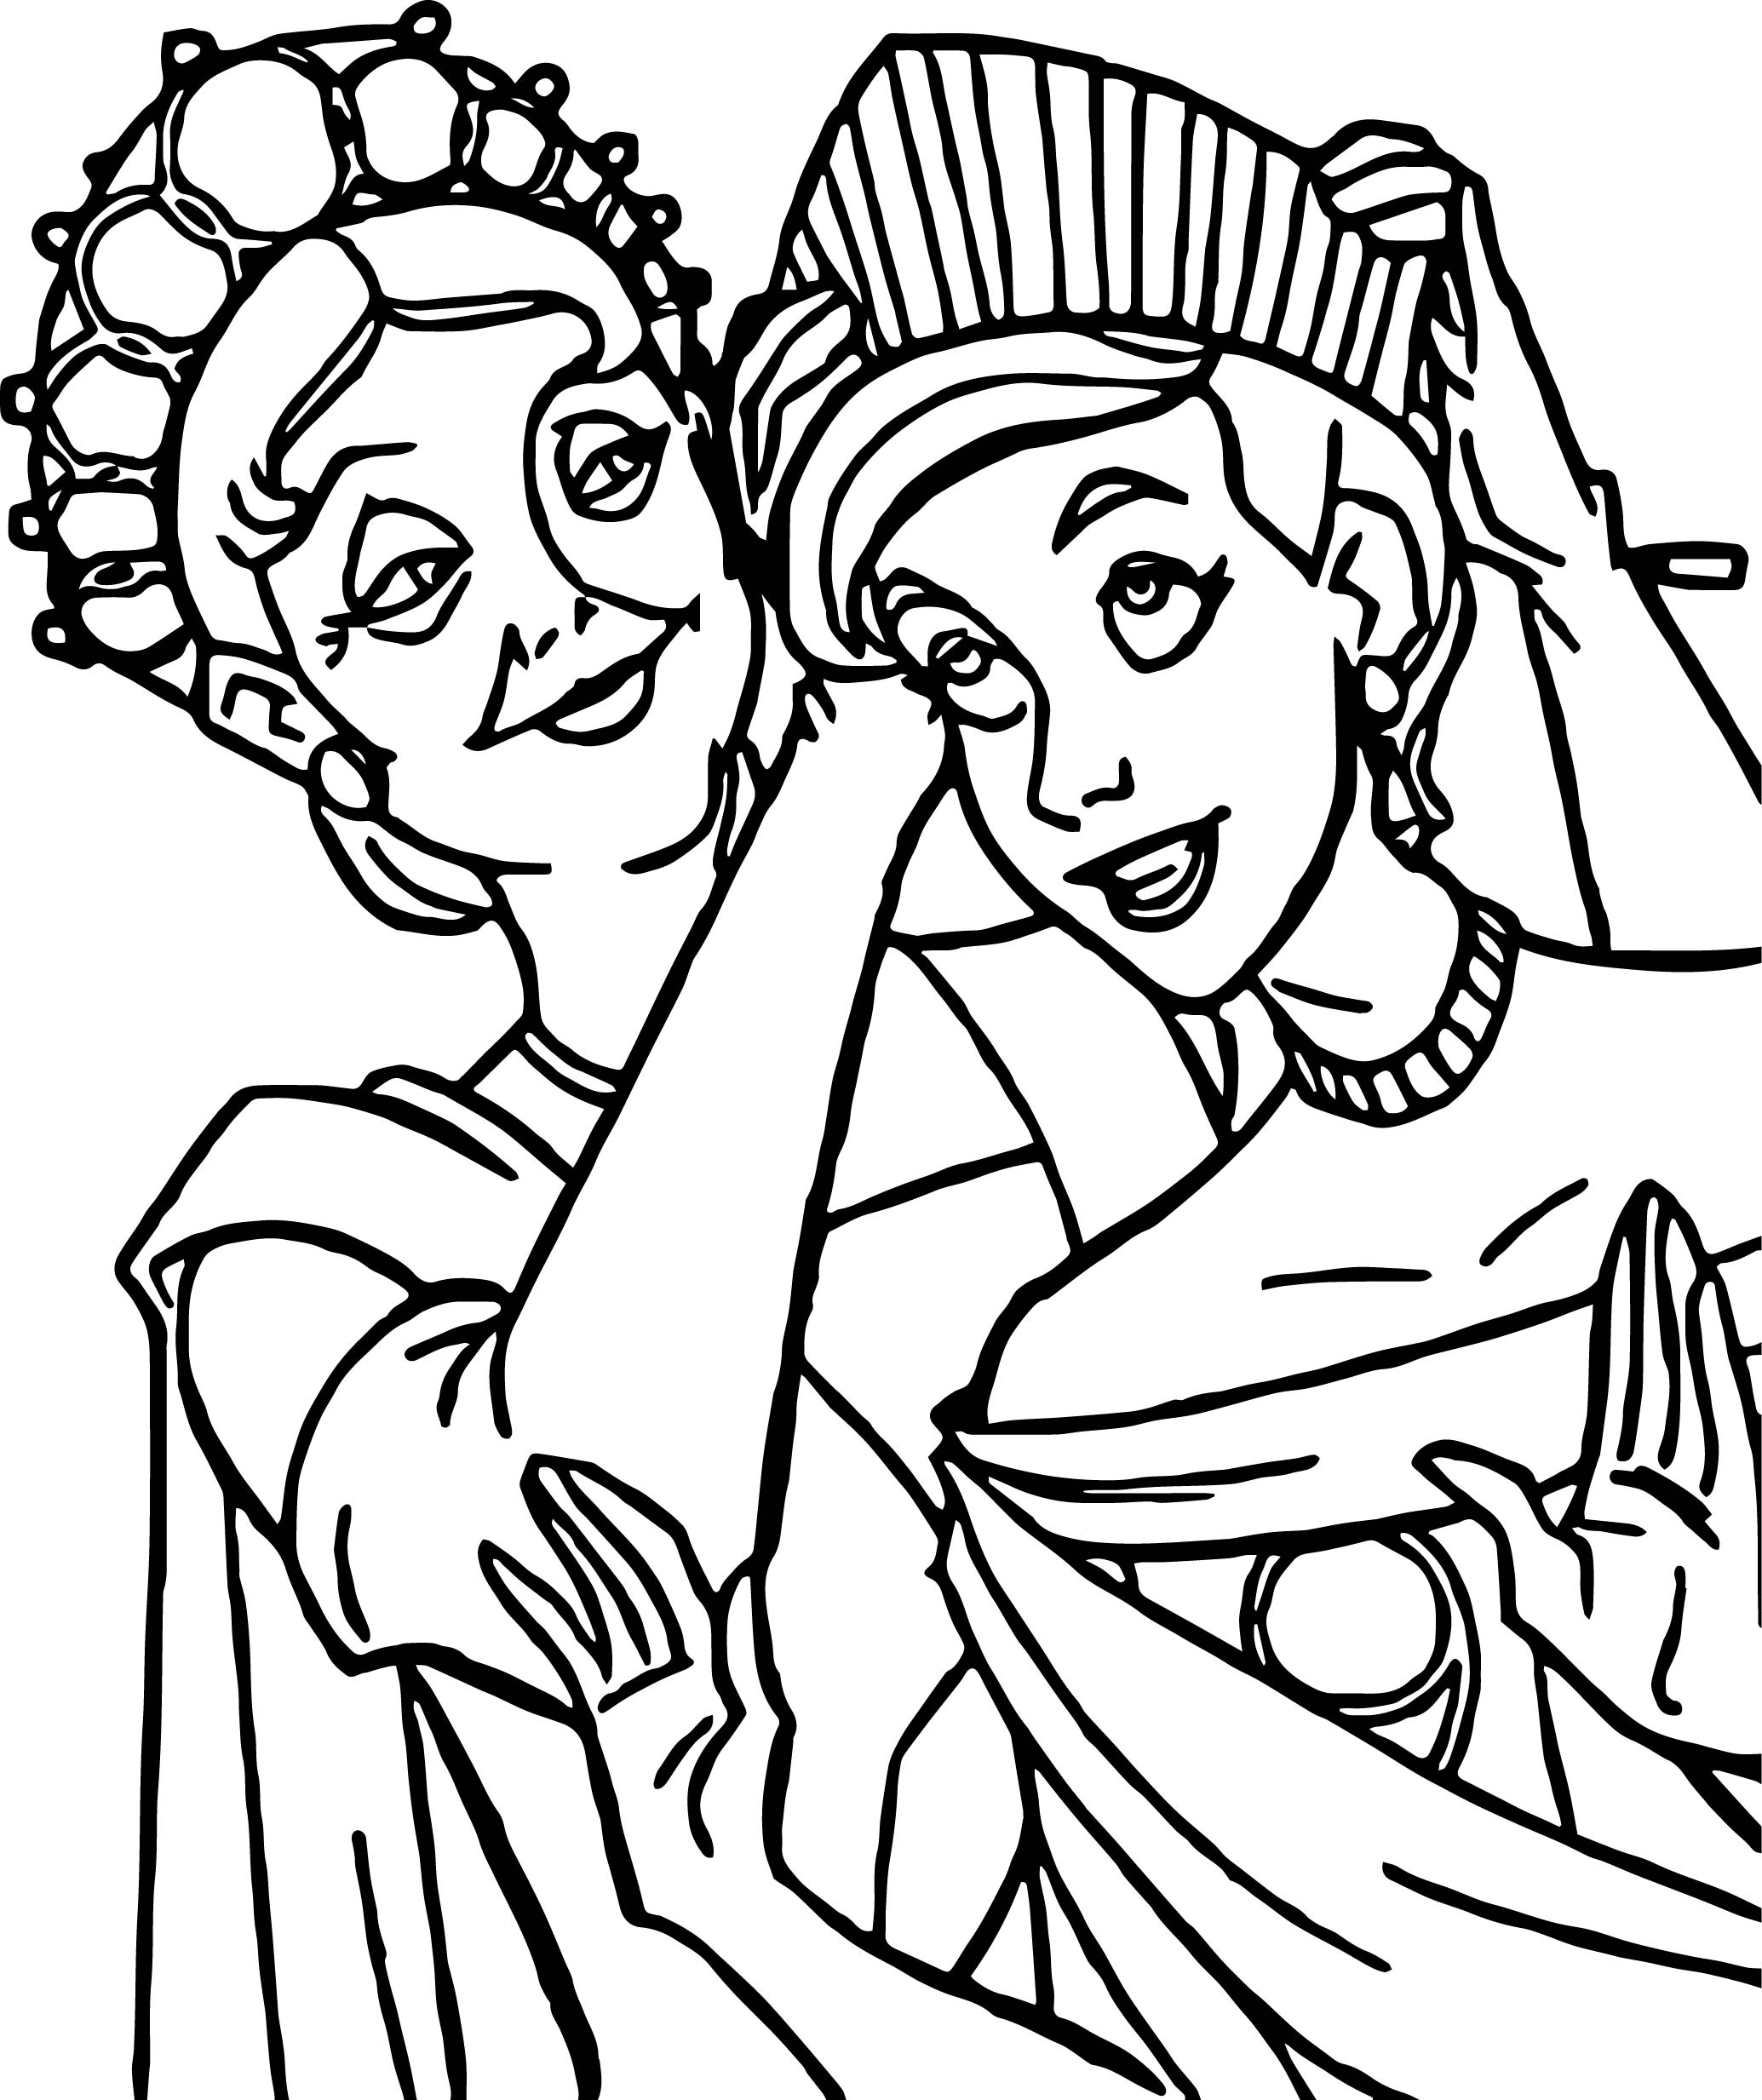 Anastasia And Mother Coloring Page - Wecoloringpage.com